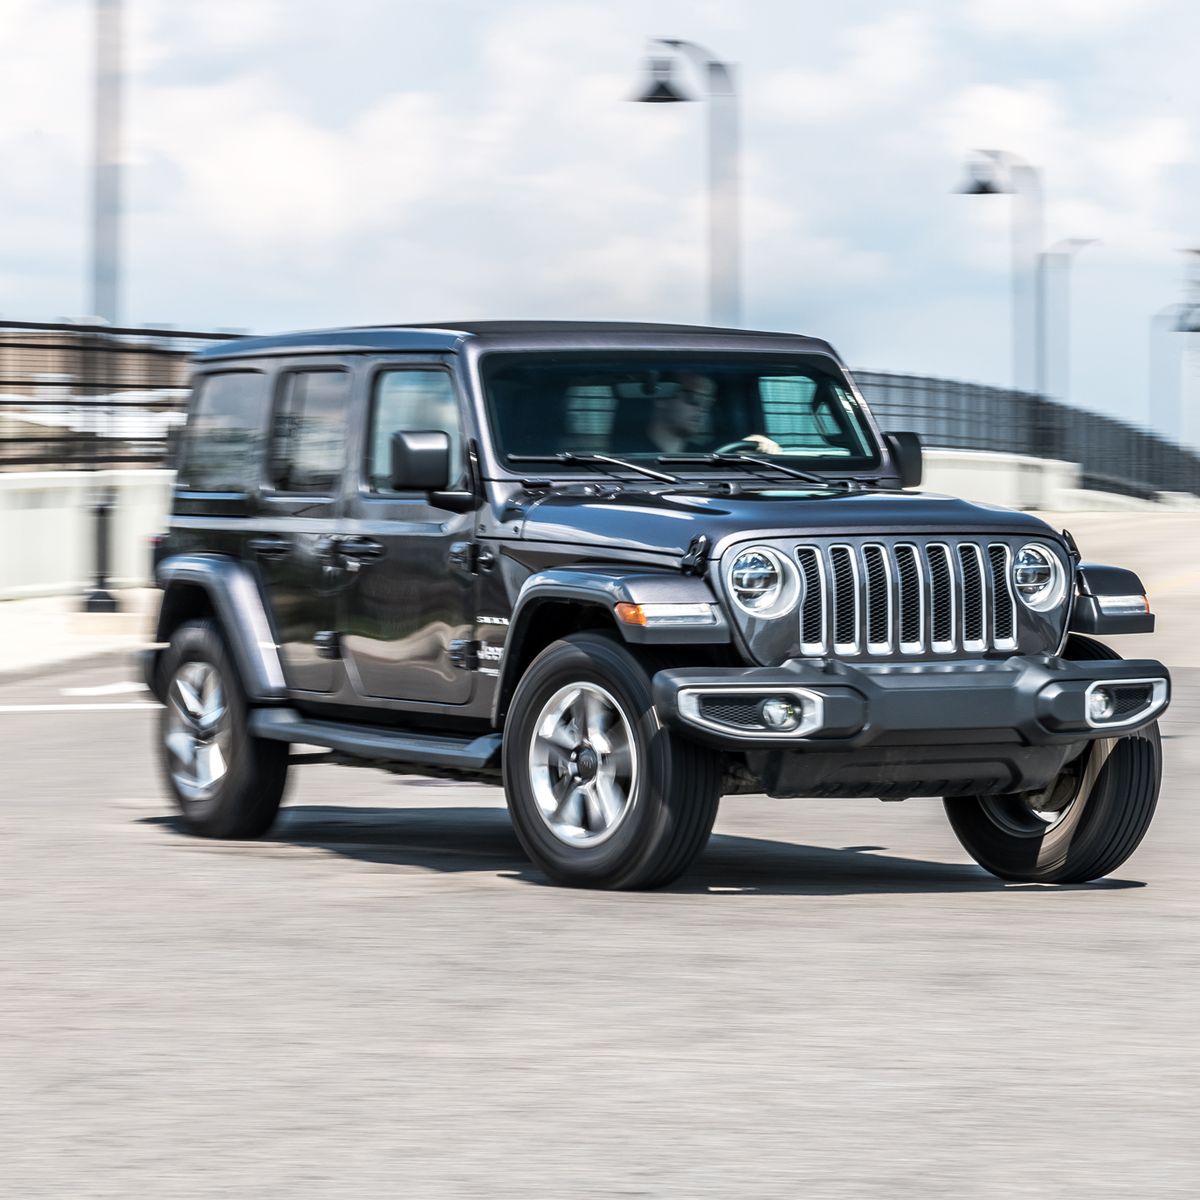 2018 Jeep Wrangler 2.0T: Four Cylinders with a Hybrid Assist